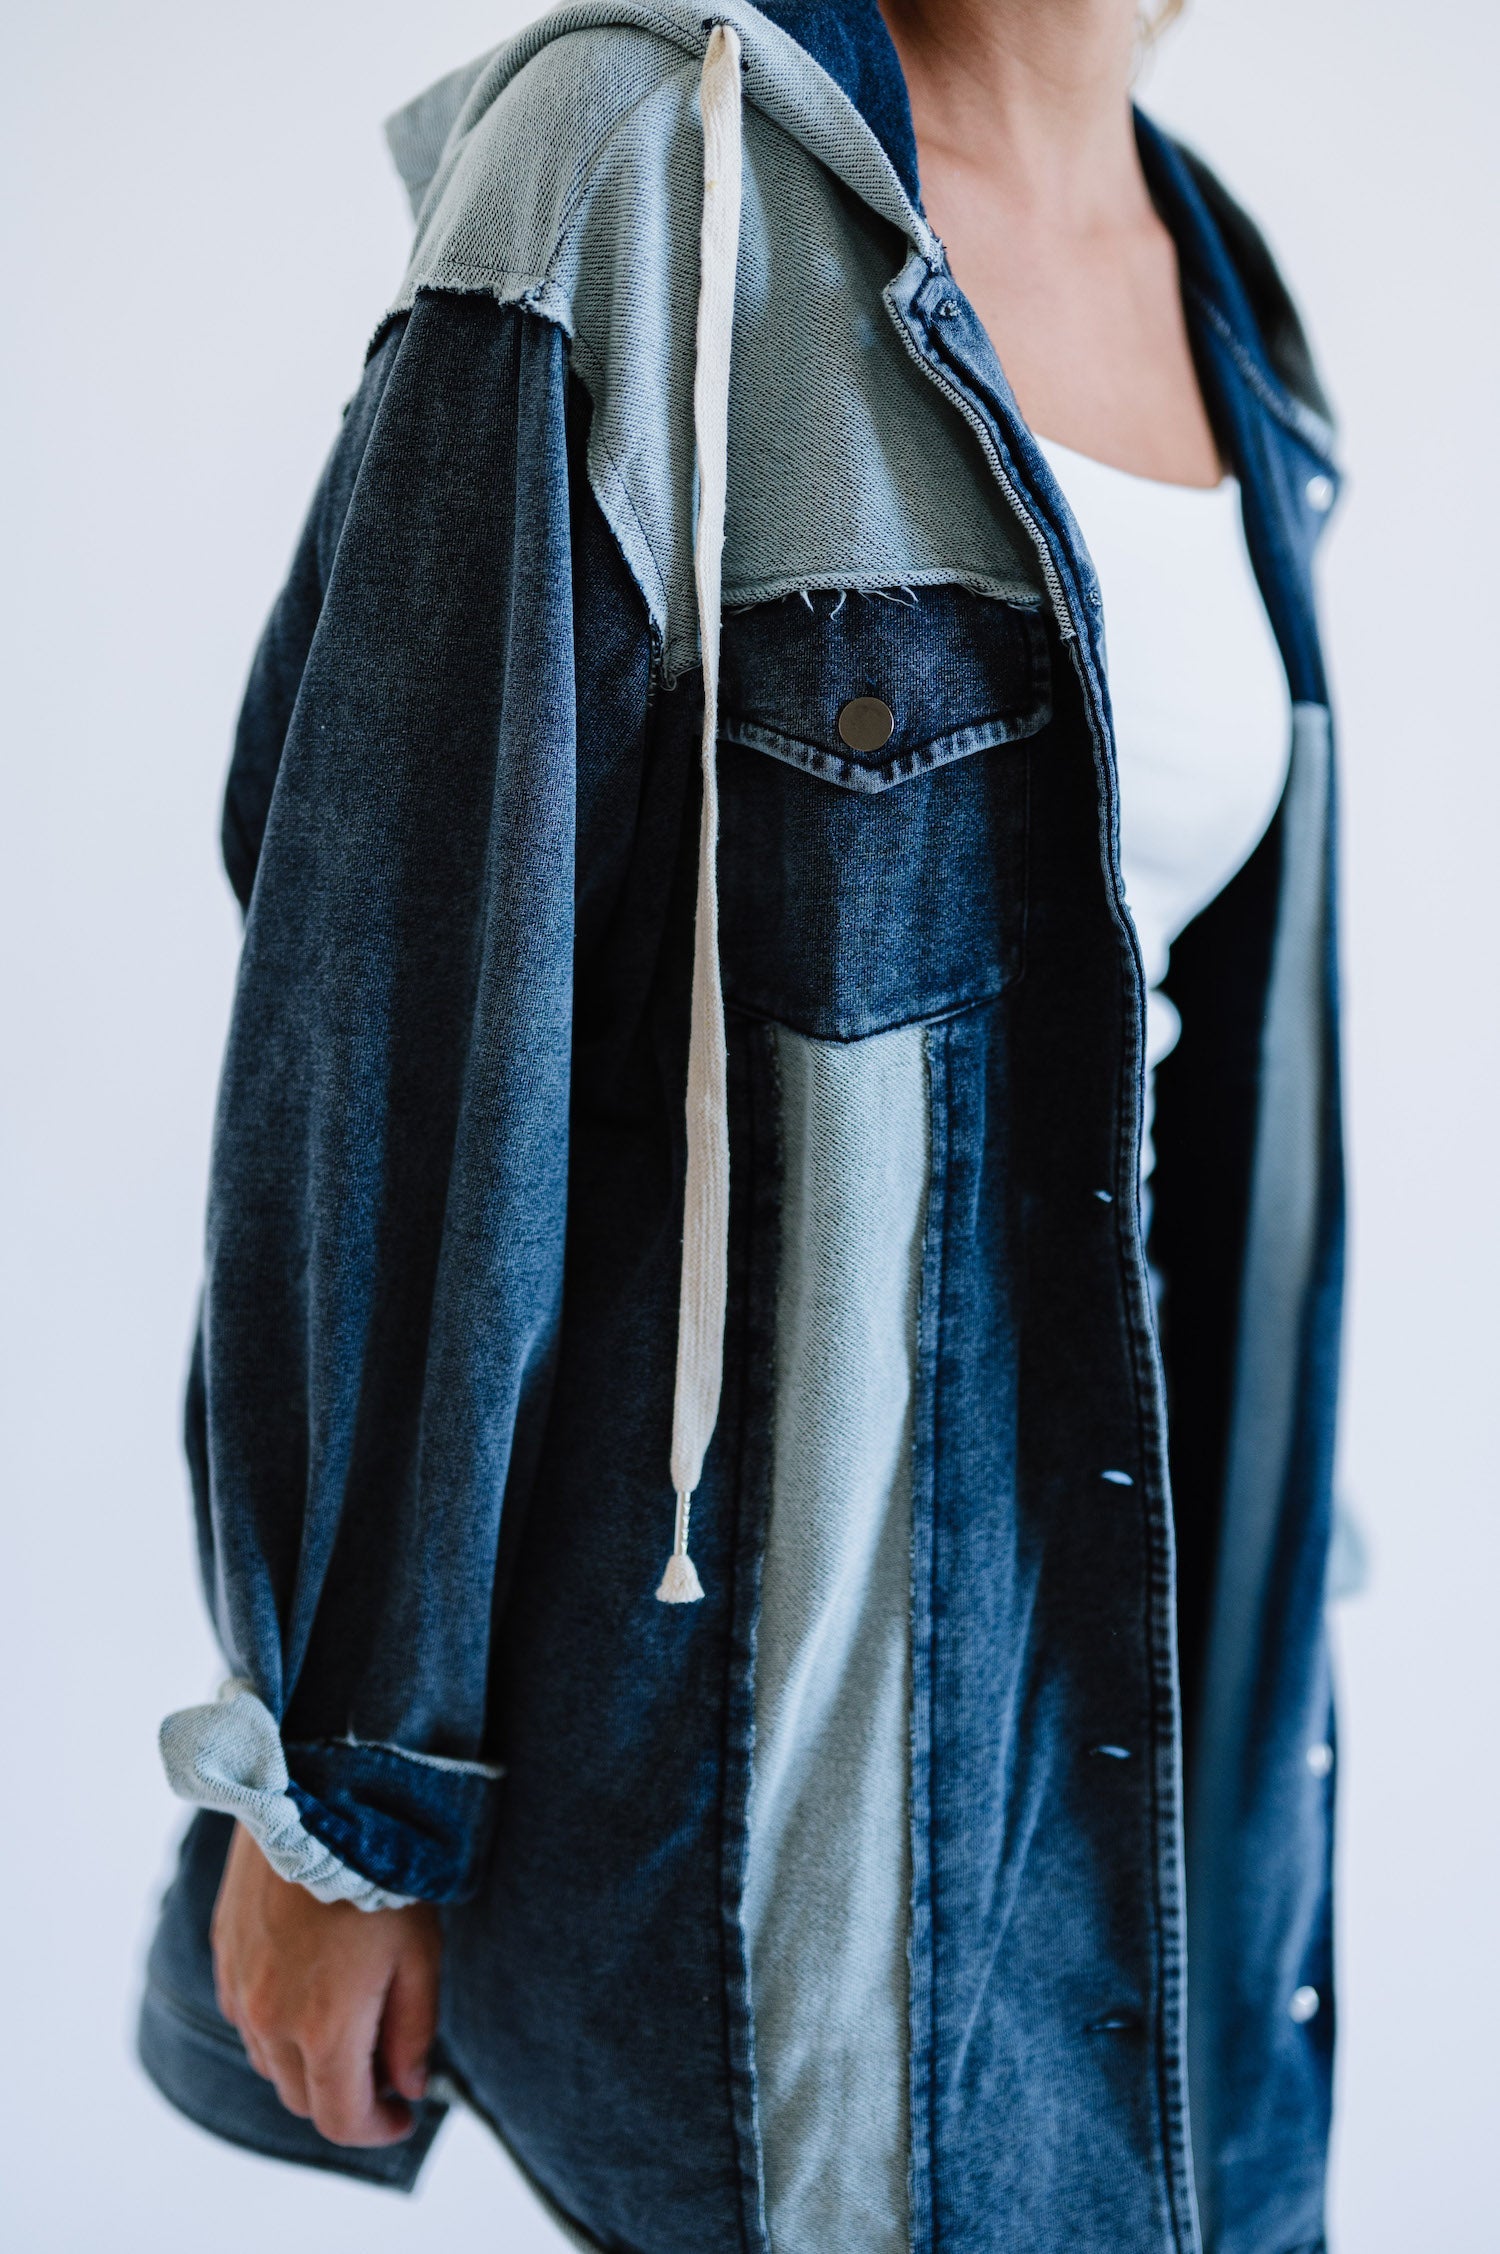 Jacket with distressed details